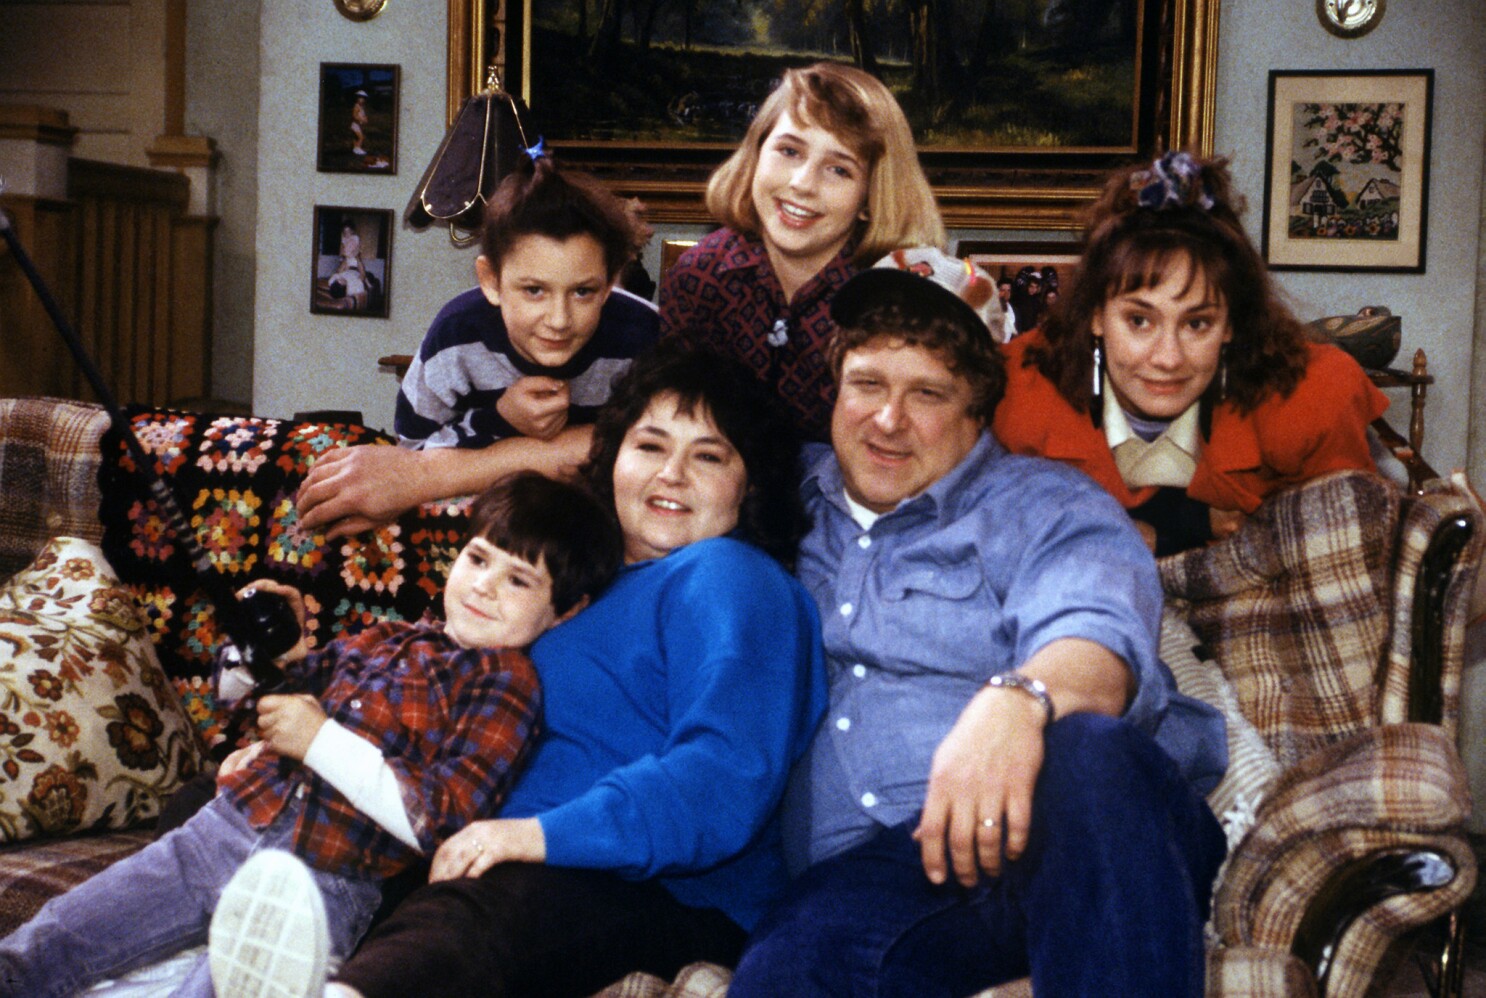 Roseanne' returning to ABC the full cast intact - The San Diego Union-Tribune